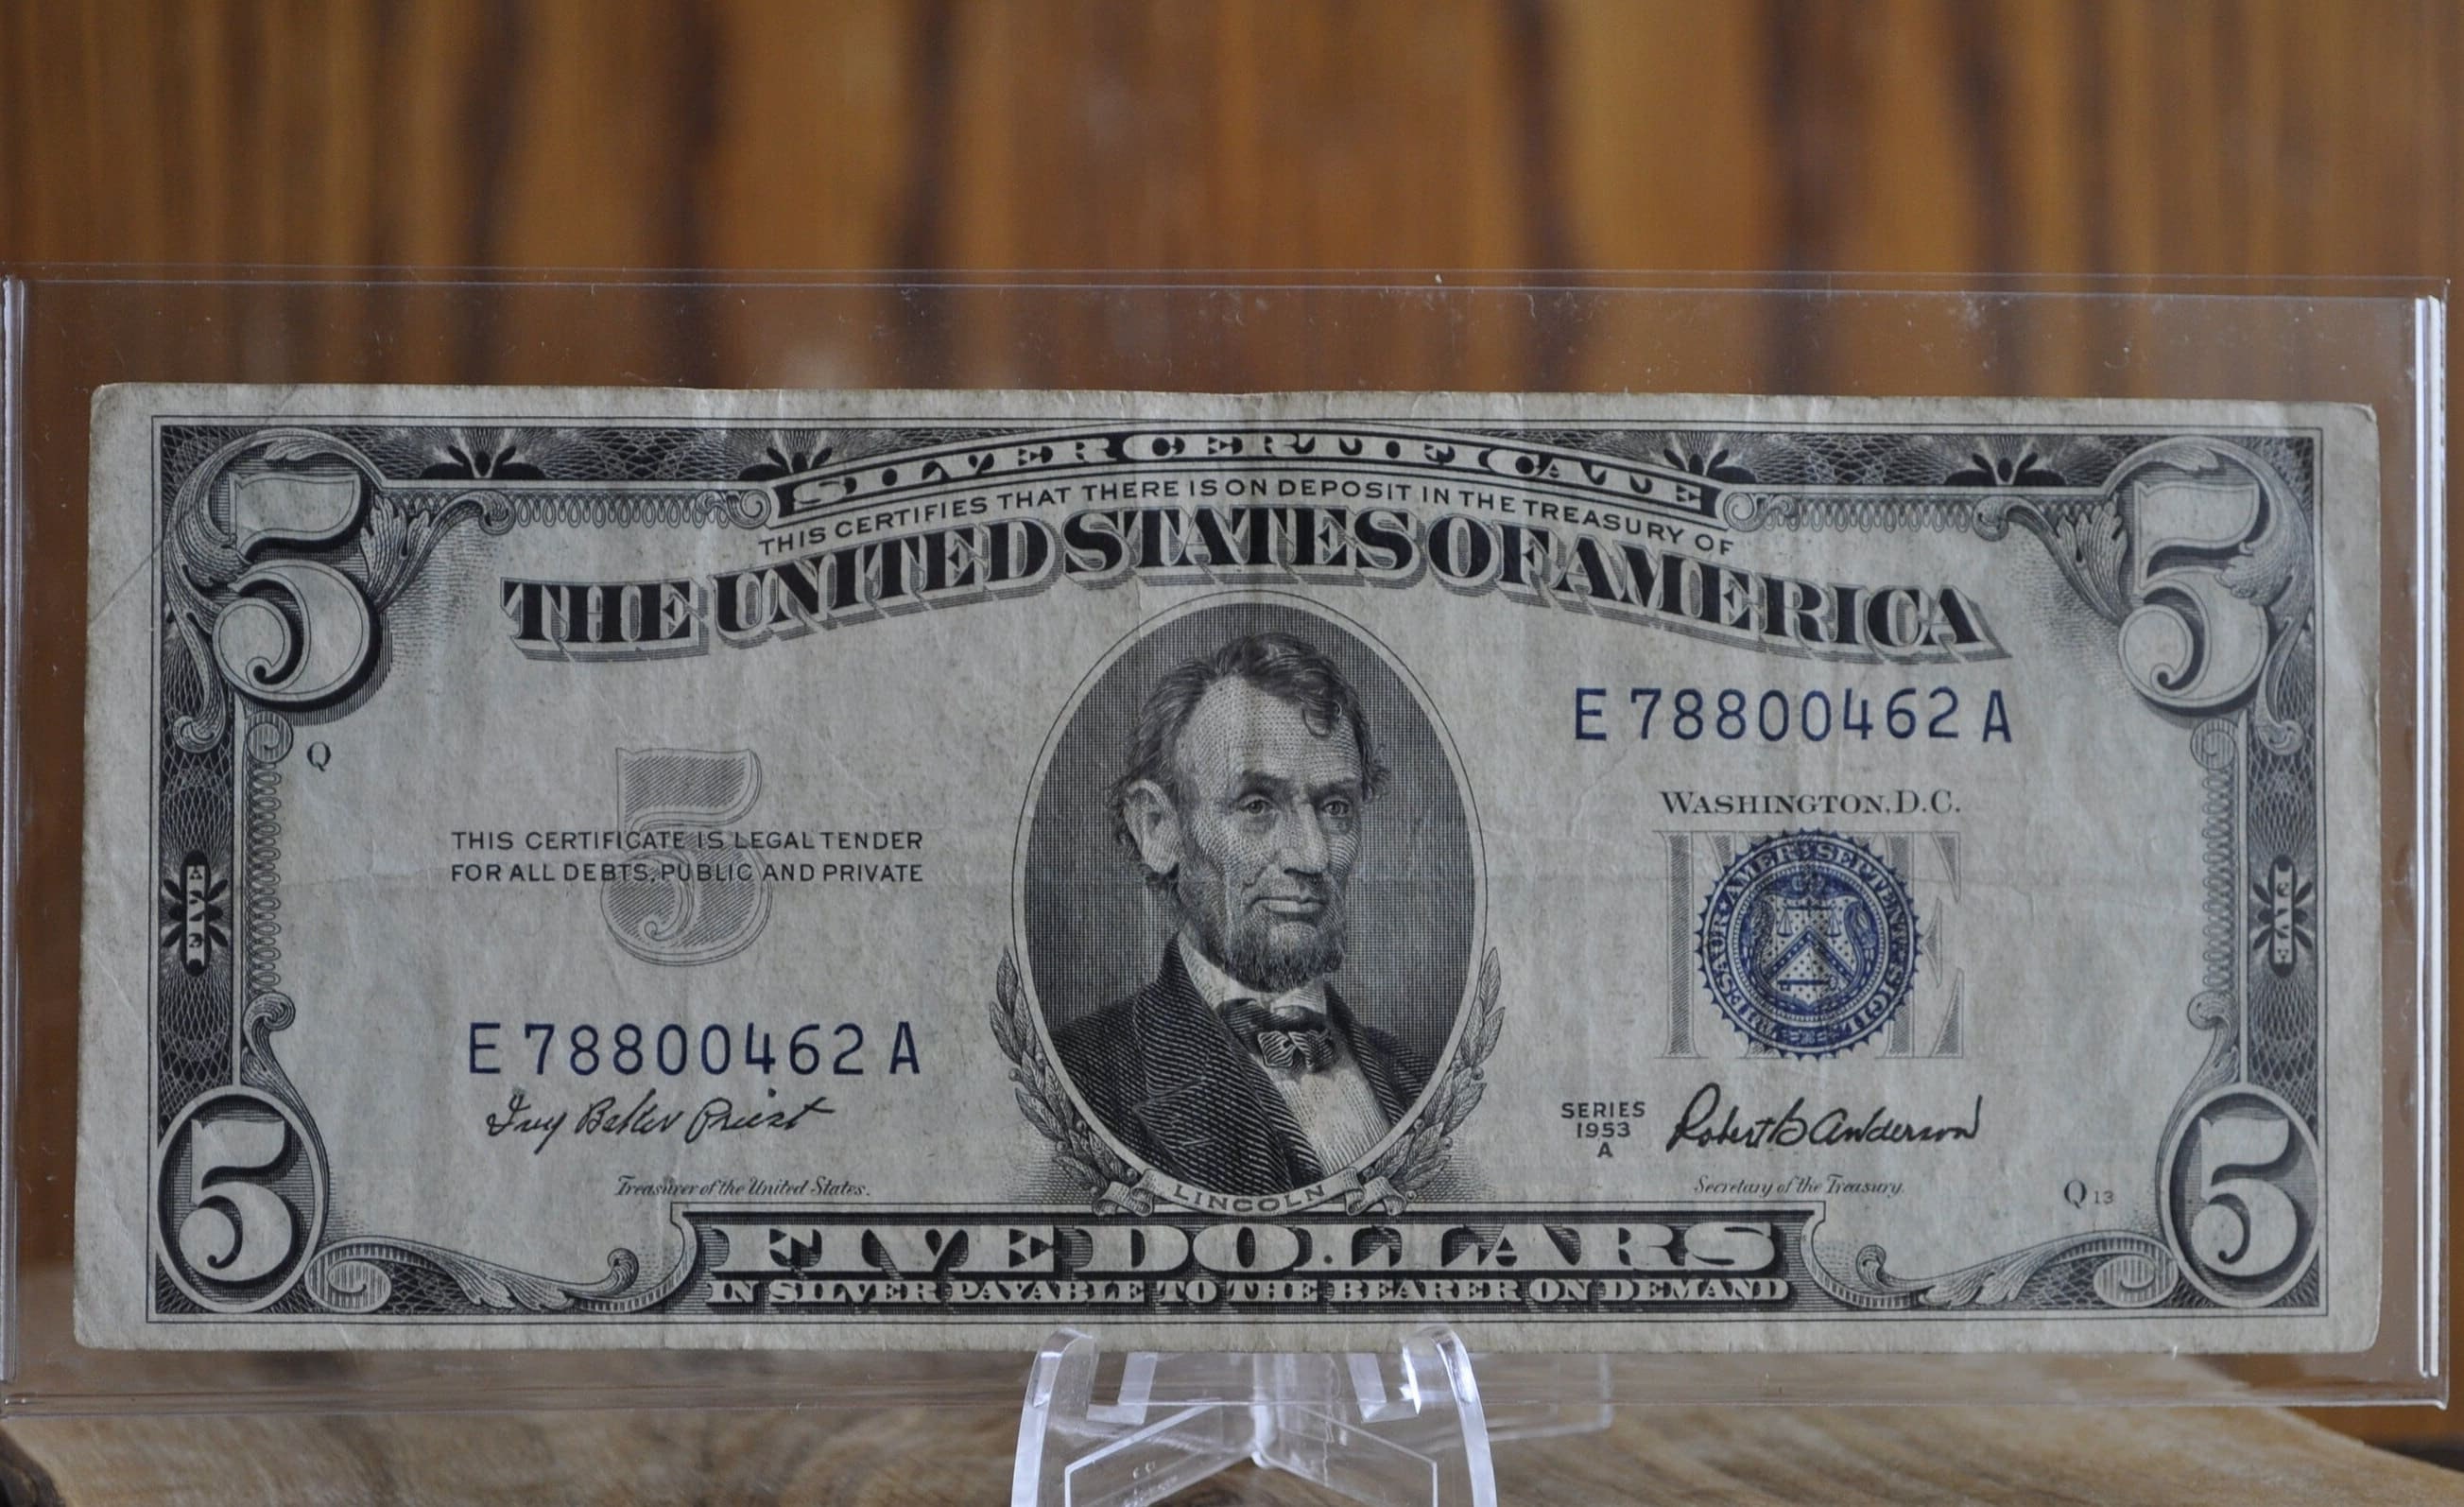 1953 Five Dollar Silver Certificate $5 Bill Blue Seal Note FREE SHIPPING-1  Note